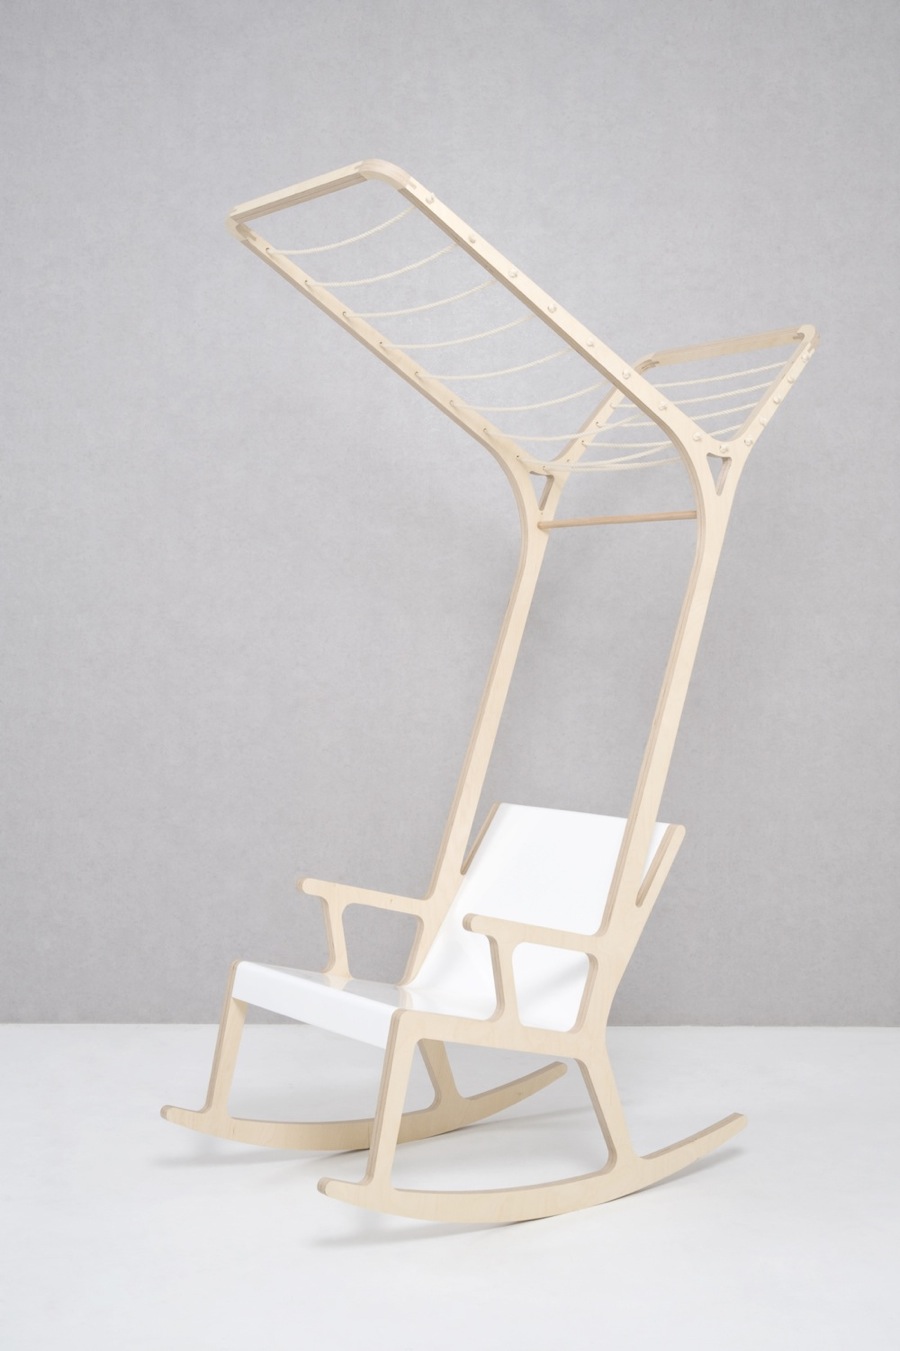 Chairs - Seung-Yong Song